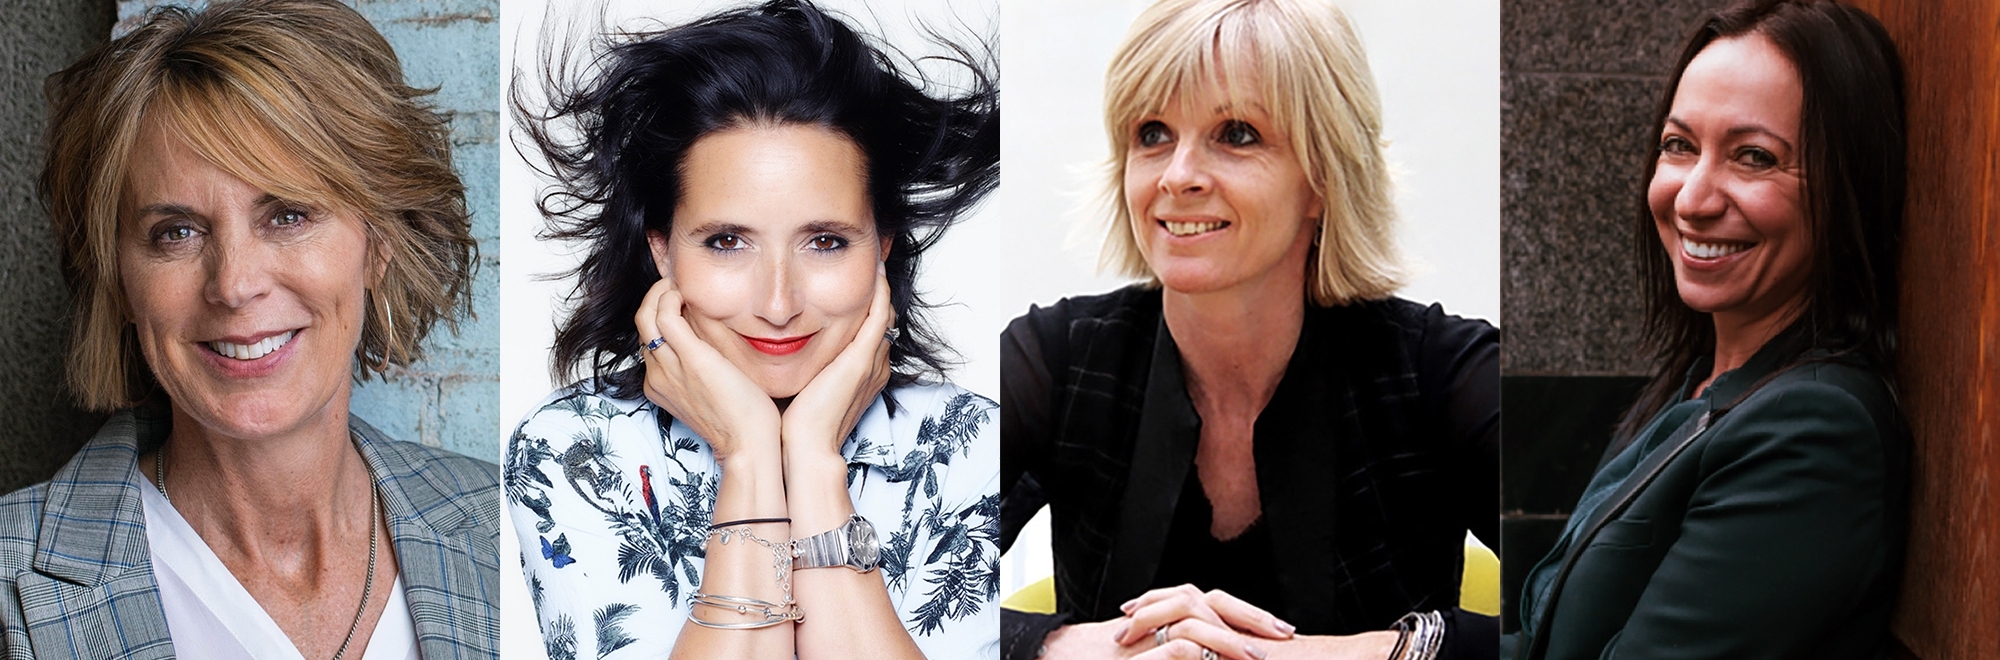 International Women's Day: Claire Bridges asks four women what it takes to be a creative leader